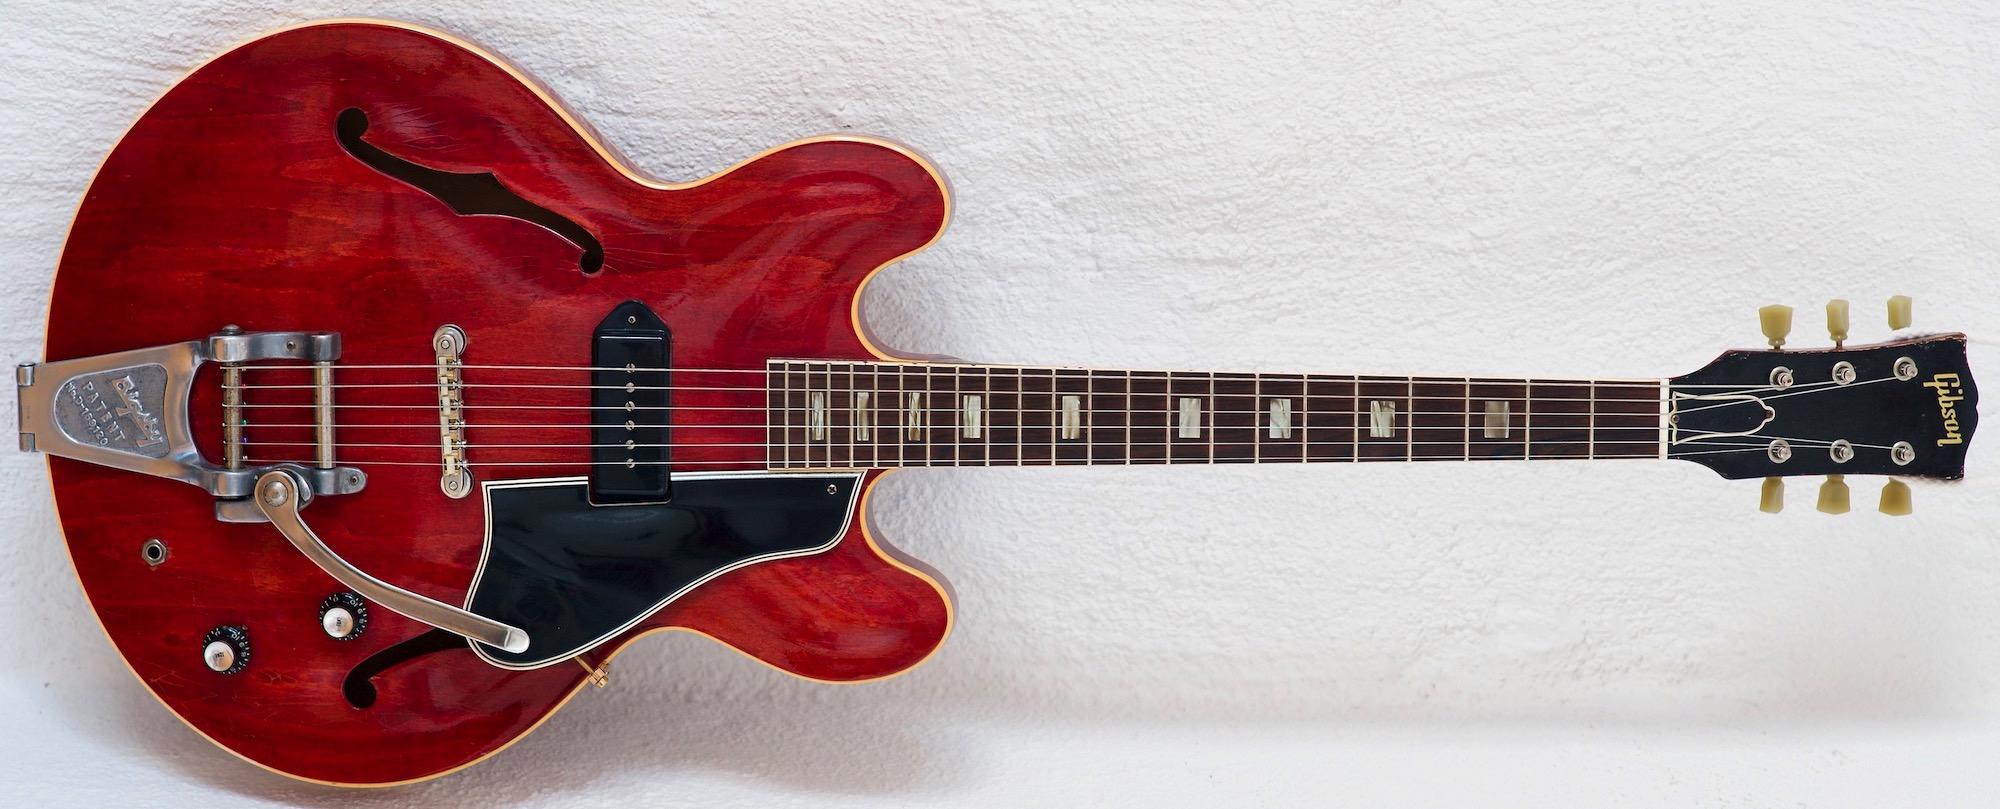 A Gibson ES-330TC from 1963